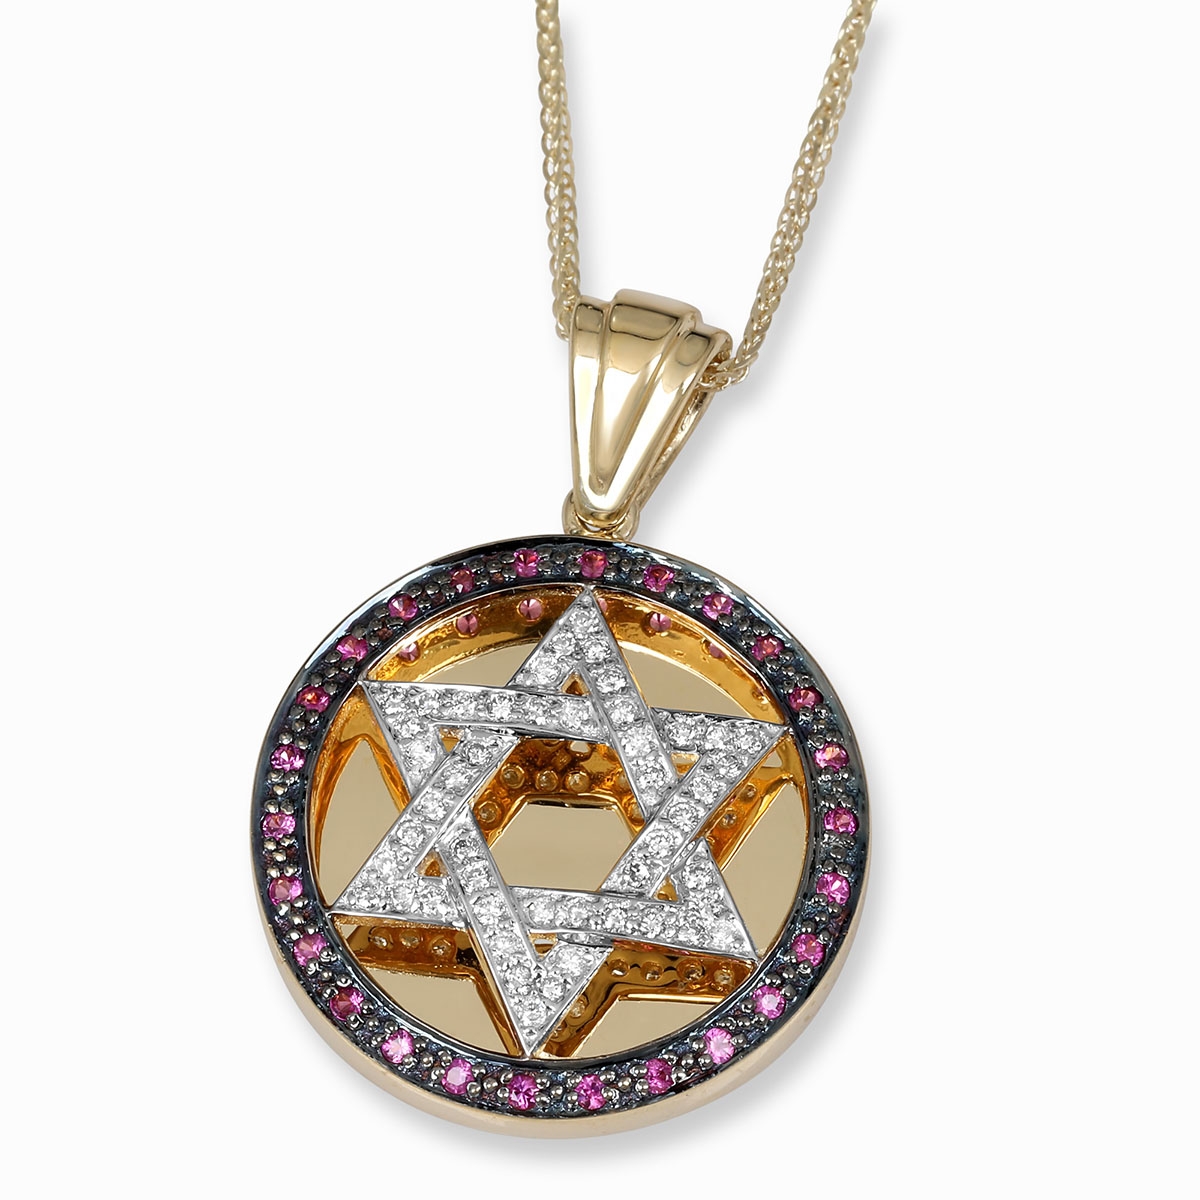 Anbinder Jewelry Two-Toned 14K Gold Round Pendant With Diamond-Accented Star of David  - 1